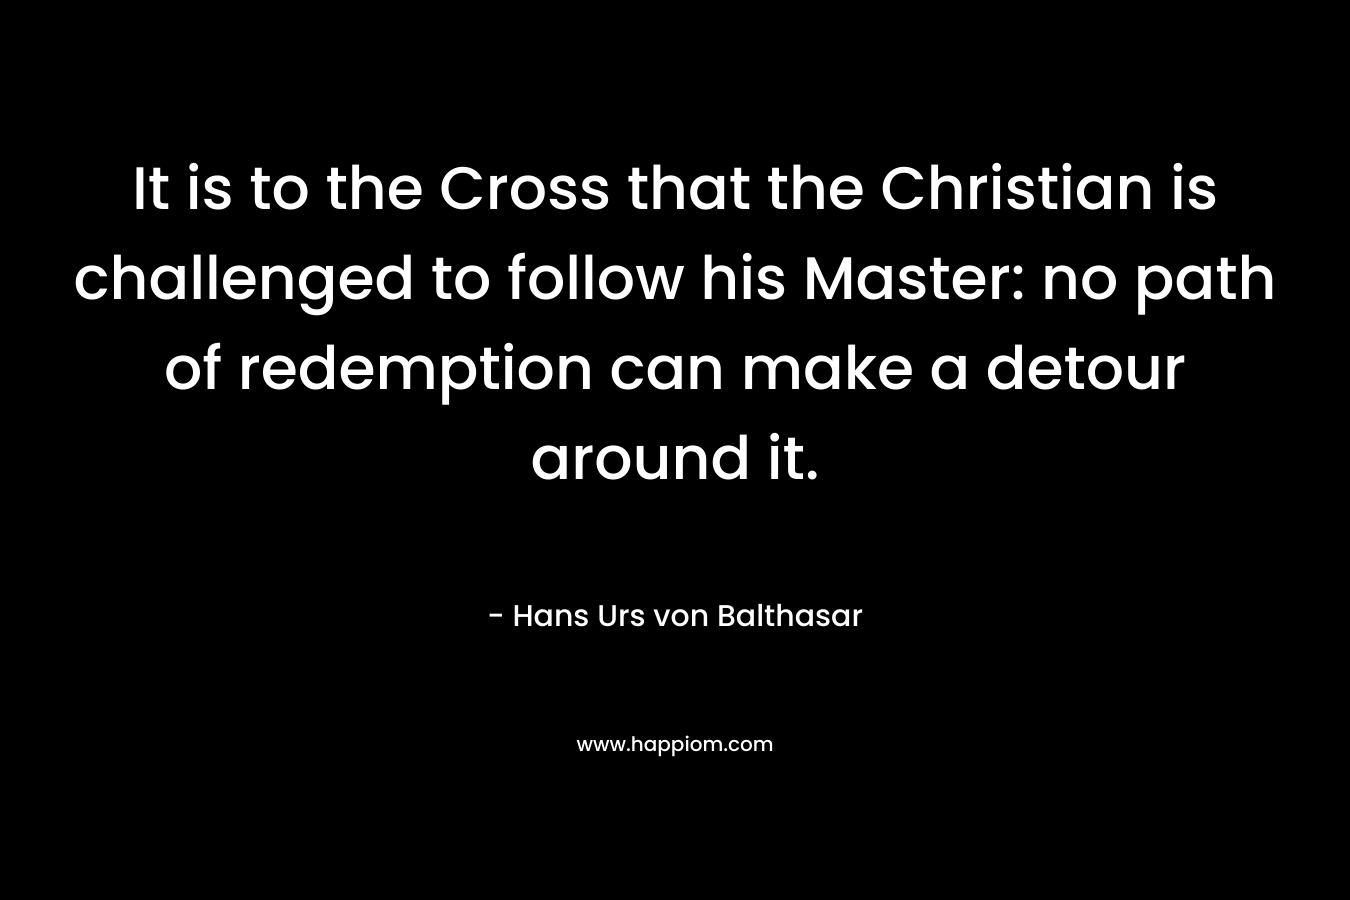 It is to the Cross that the Christian is challenged to follow his Master: no path of redemption can make a detour around it. – Hans Urs von Balthasar